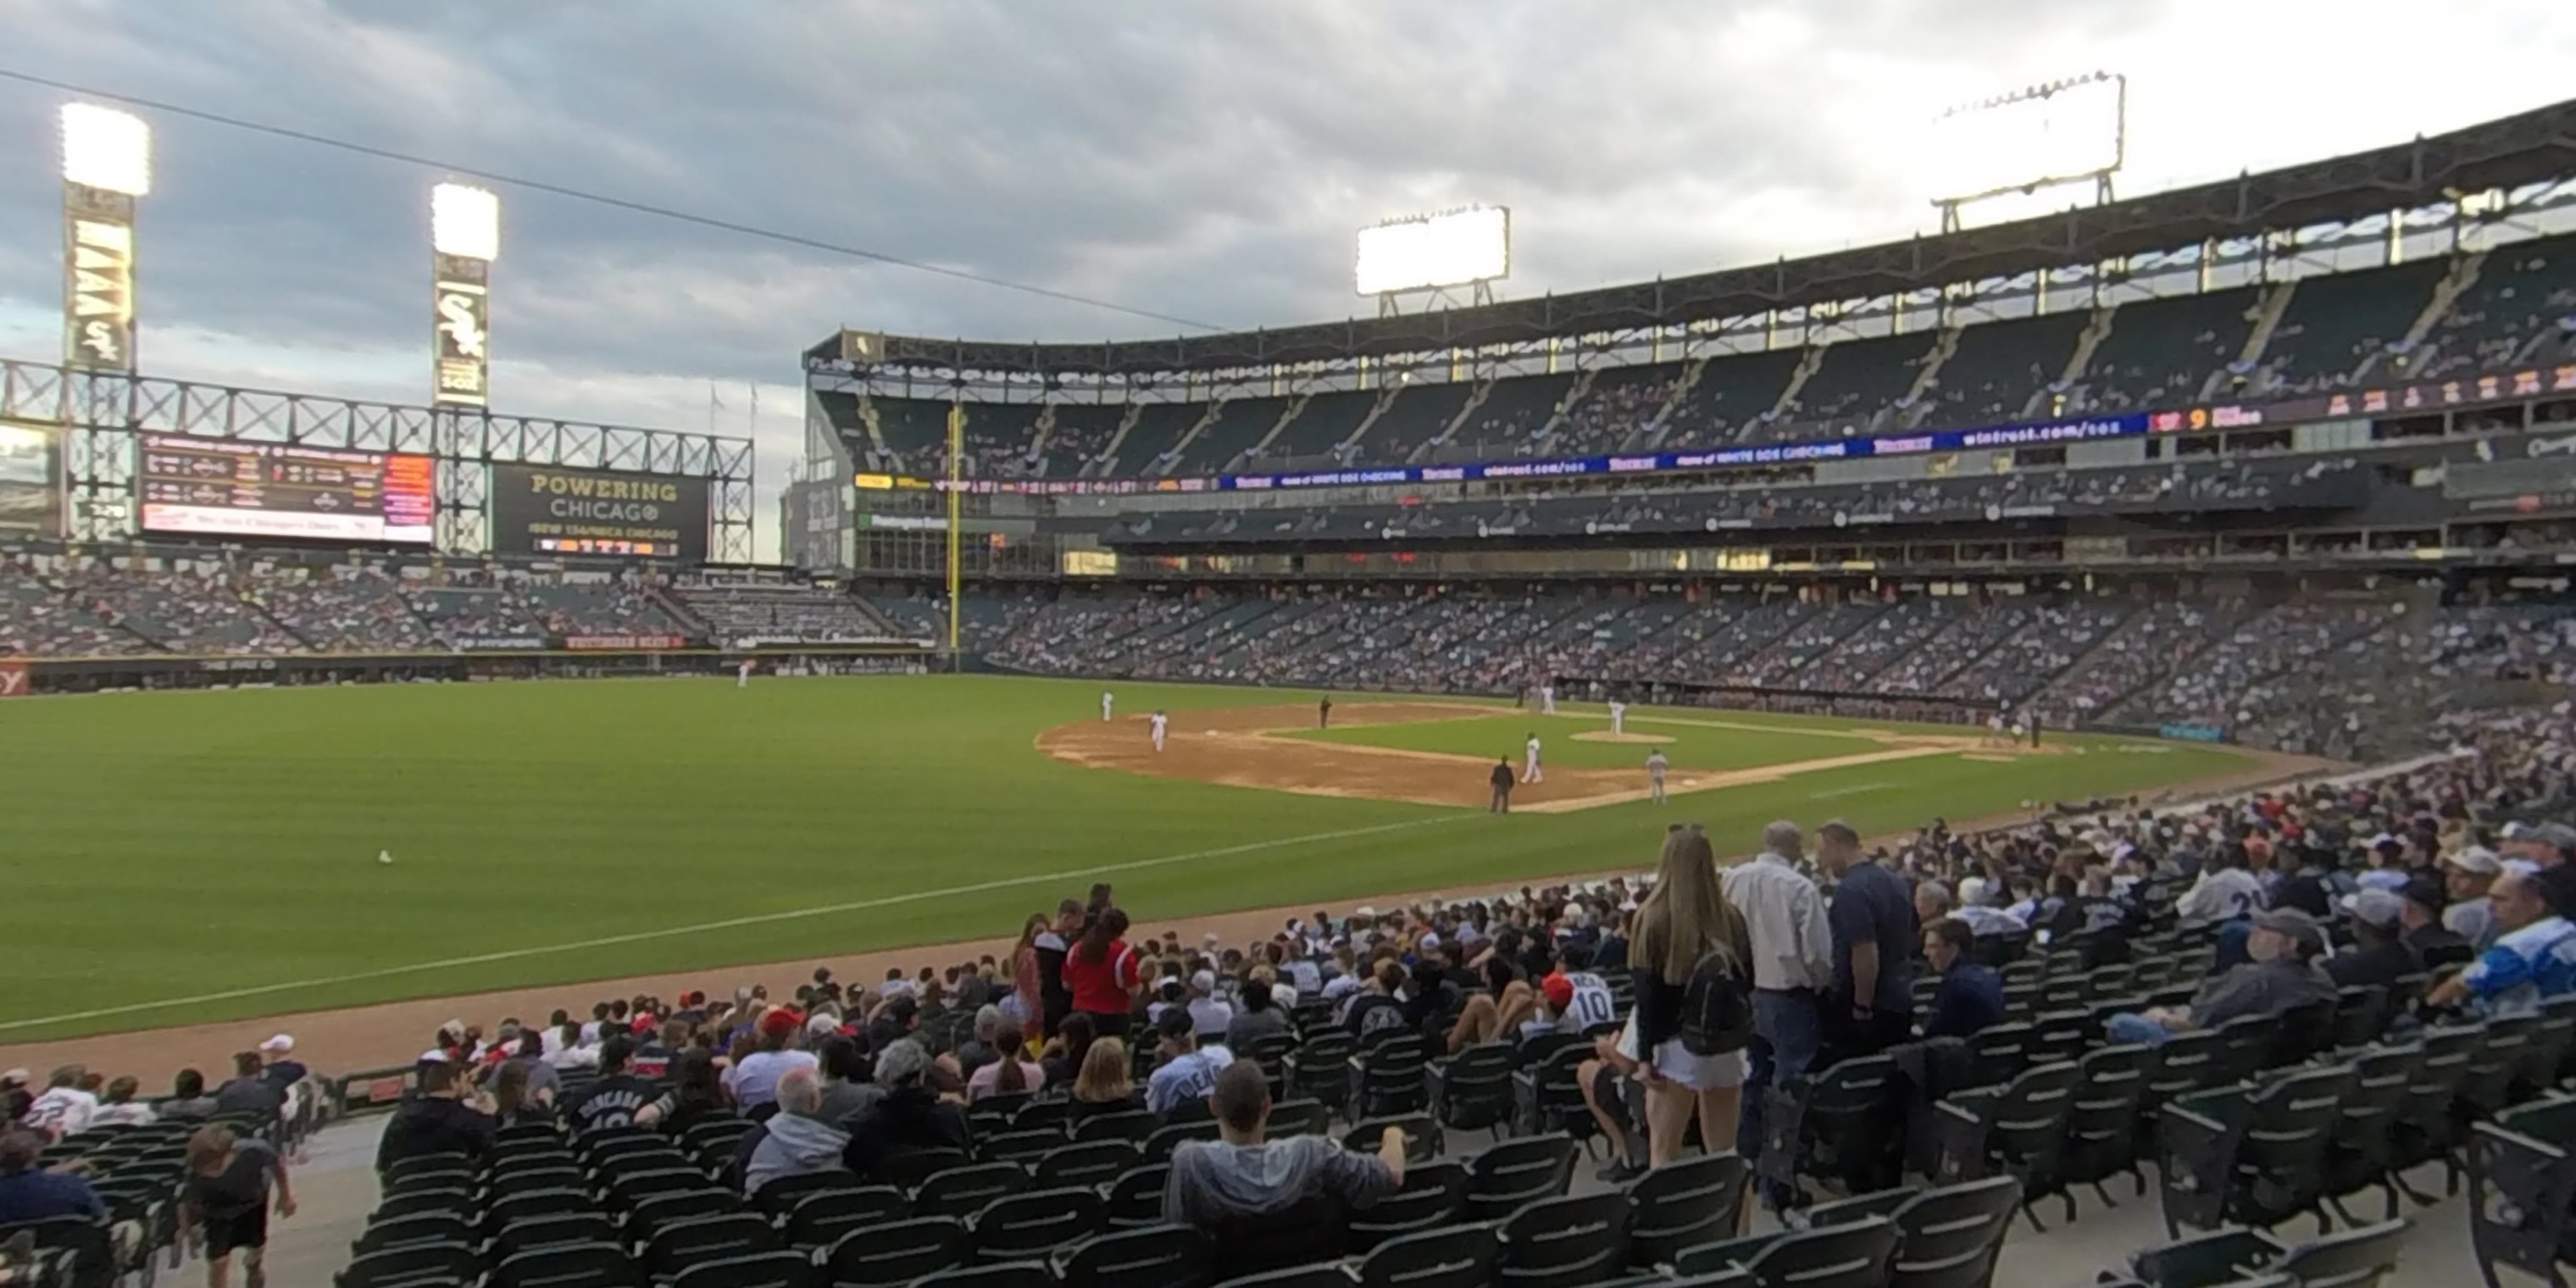 section 148 panoramic seat view  - guaranteed rate field